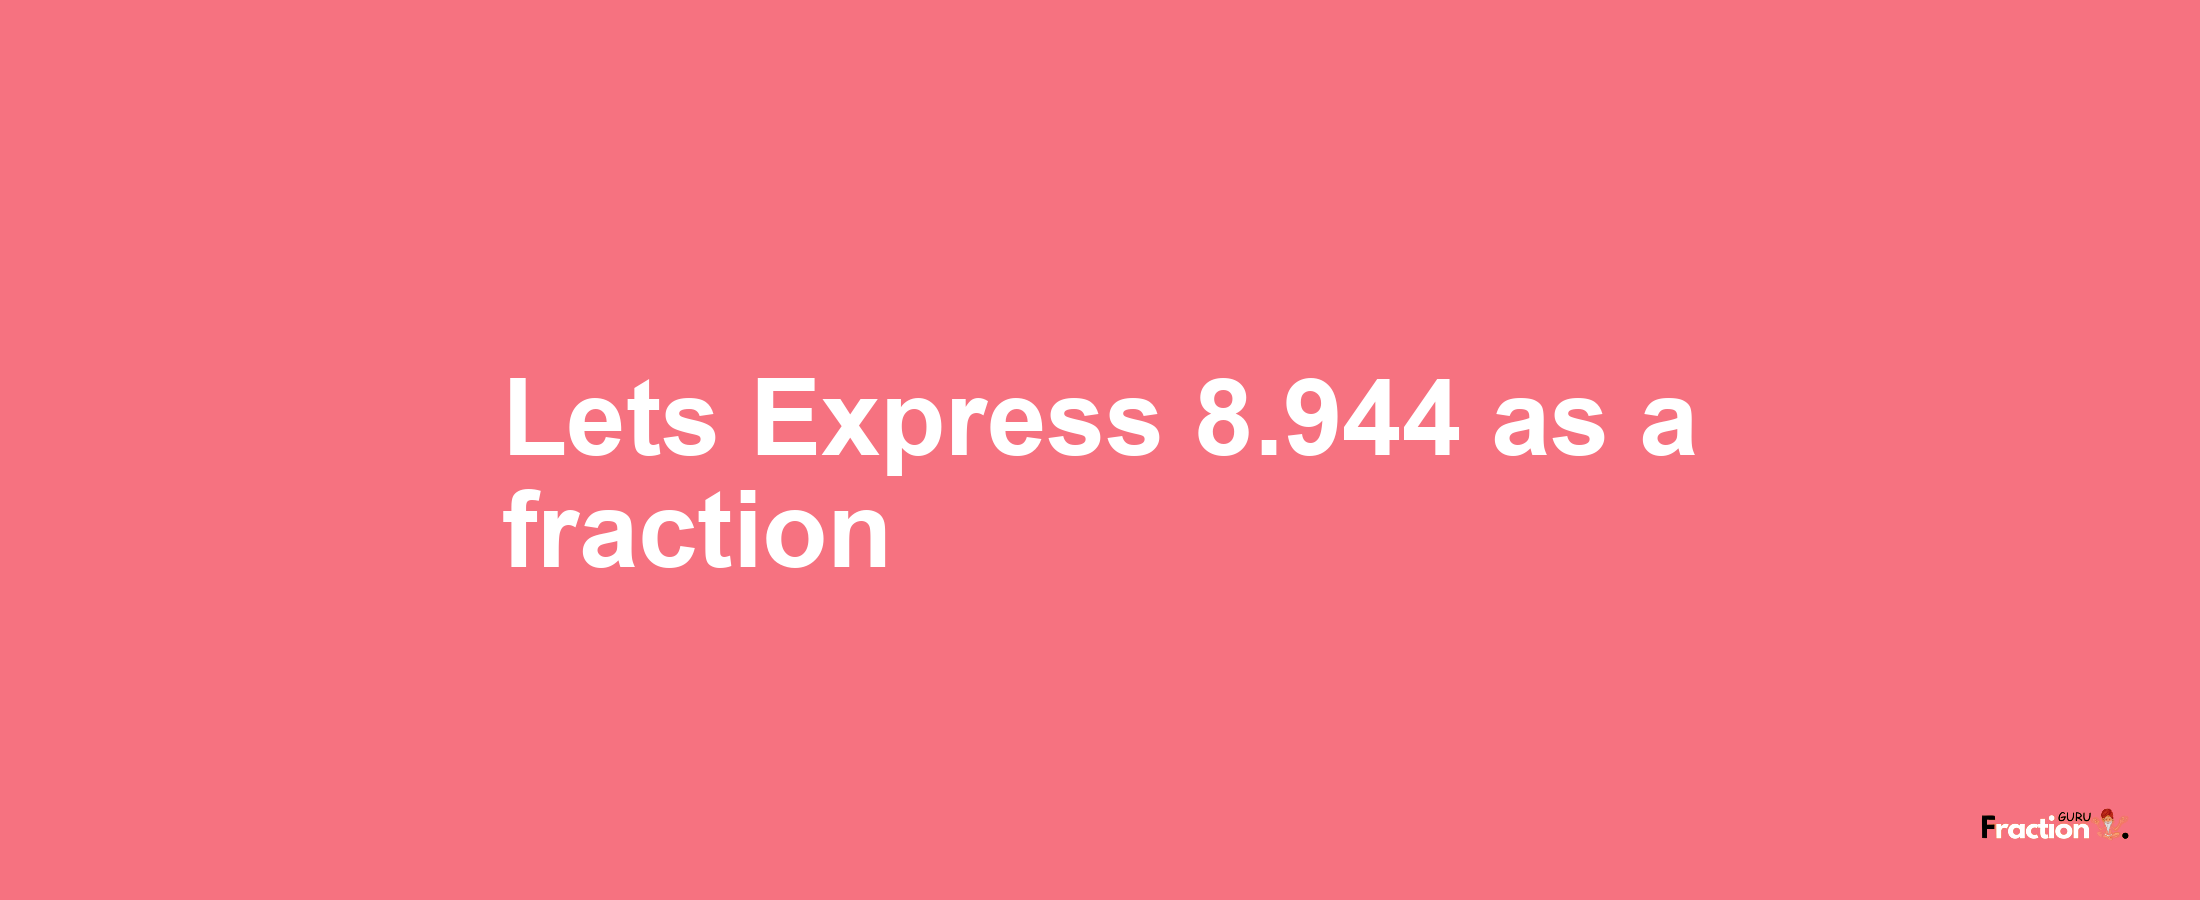 Lets Express 8.944 as afraction